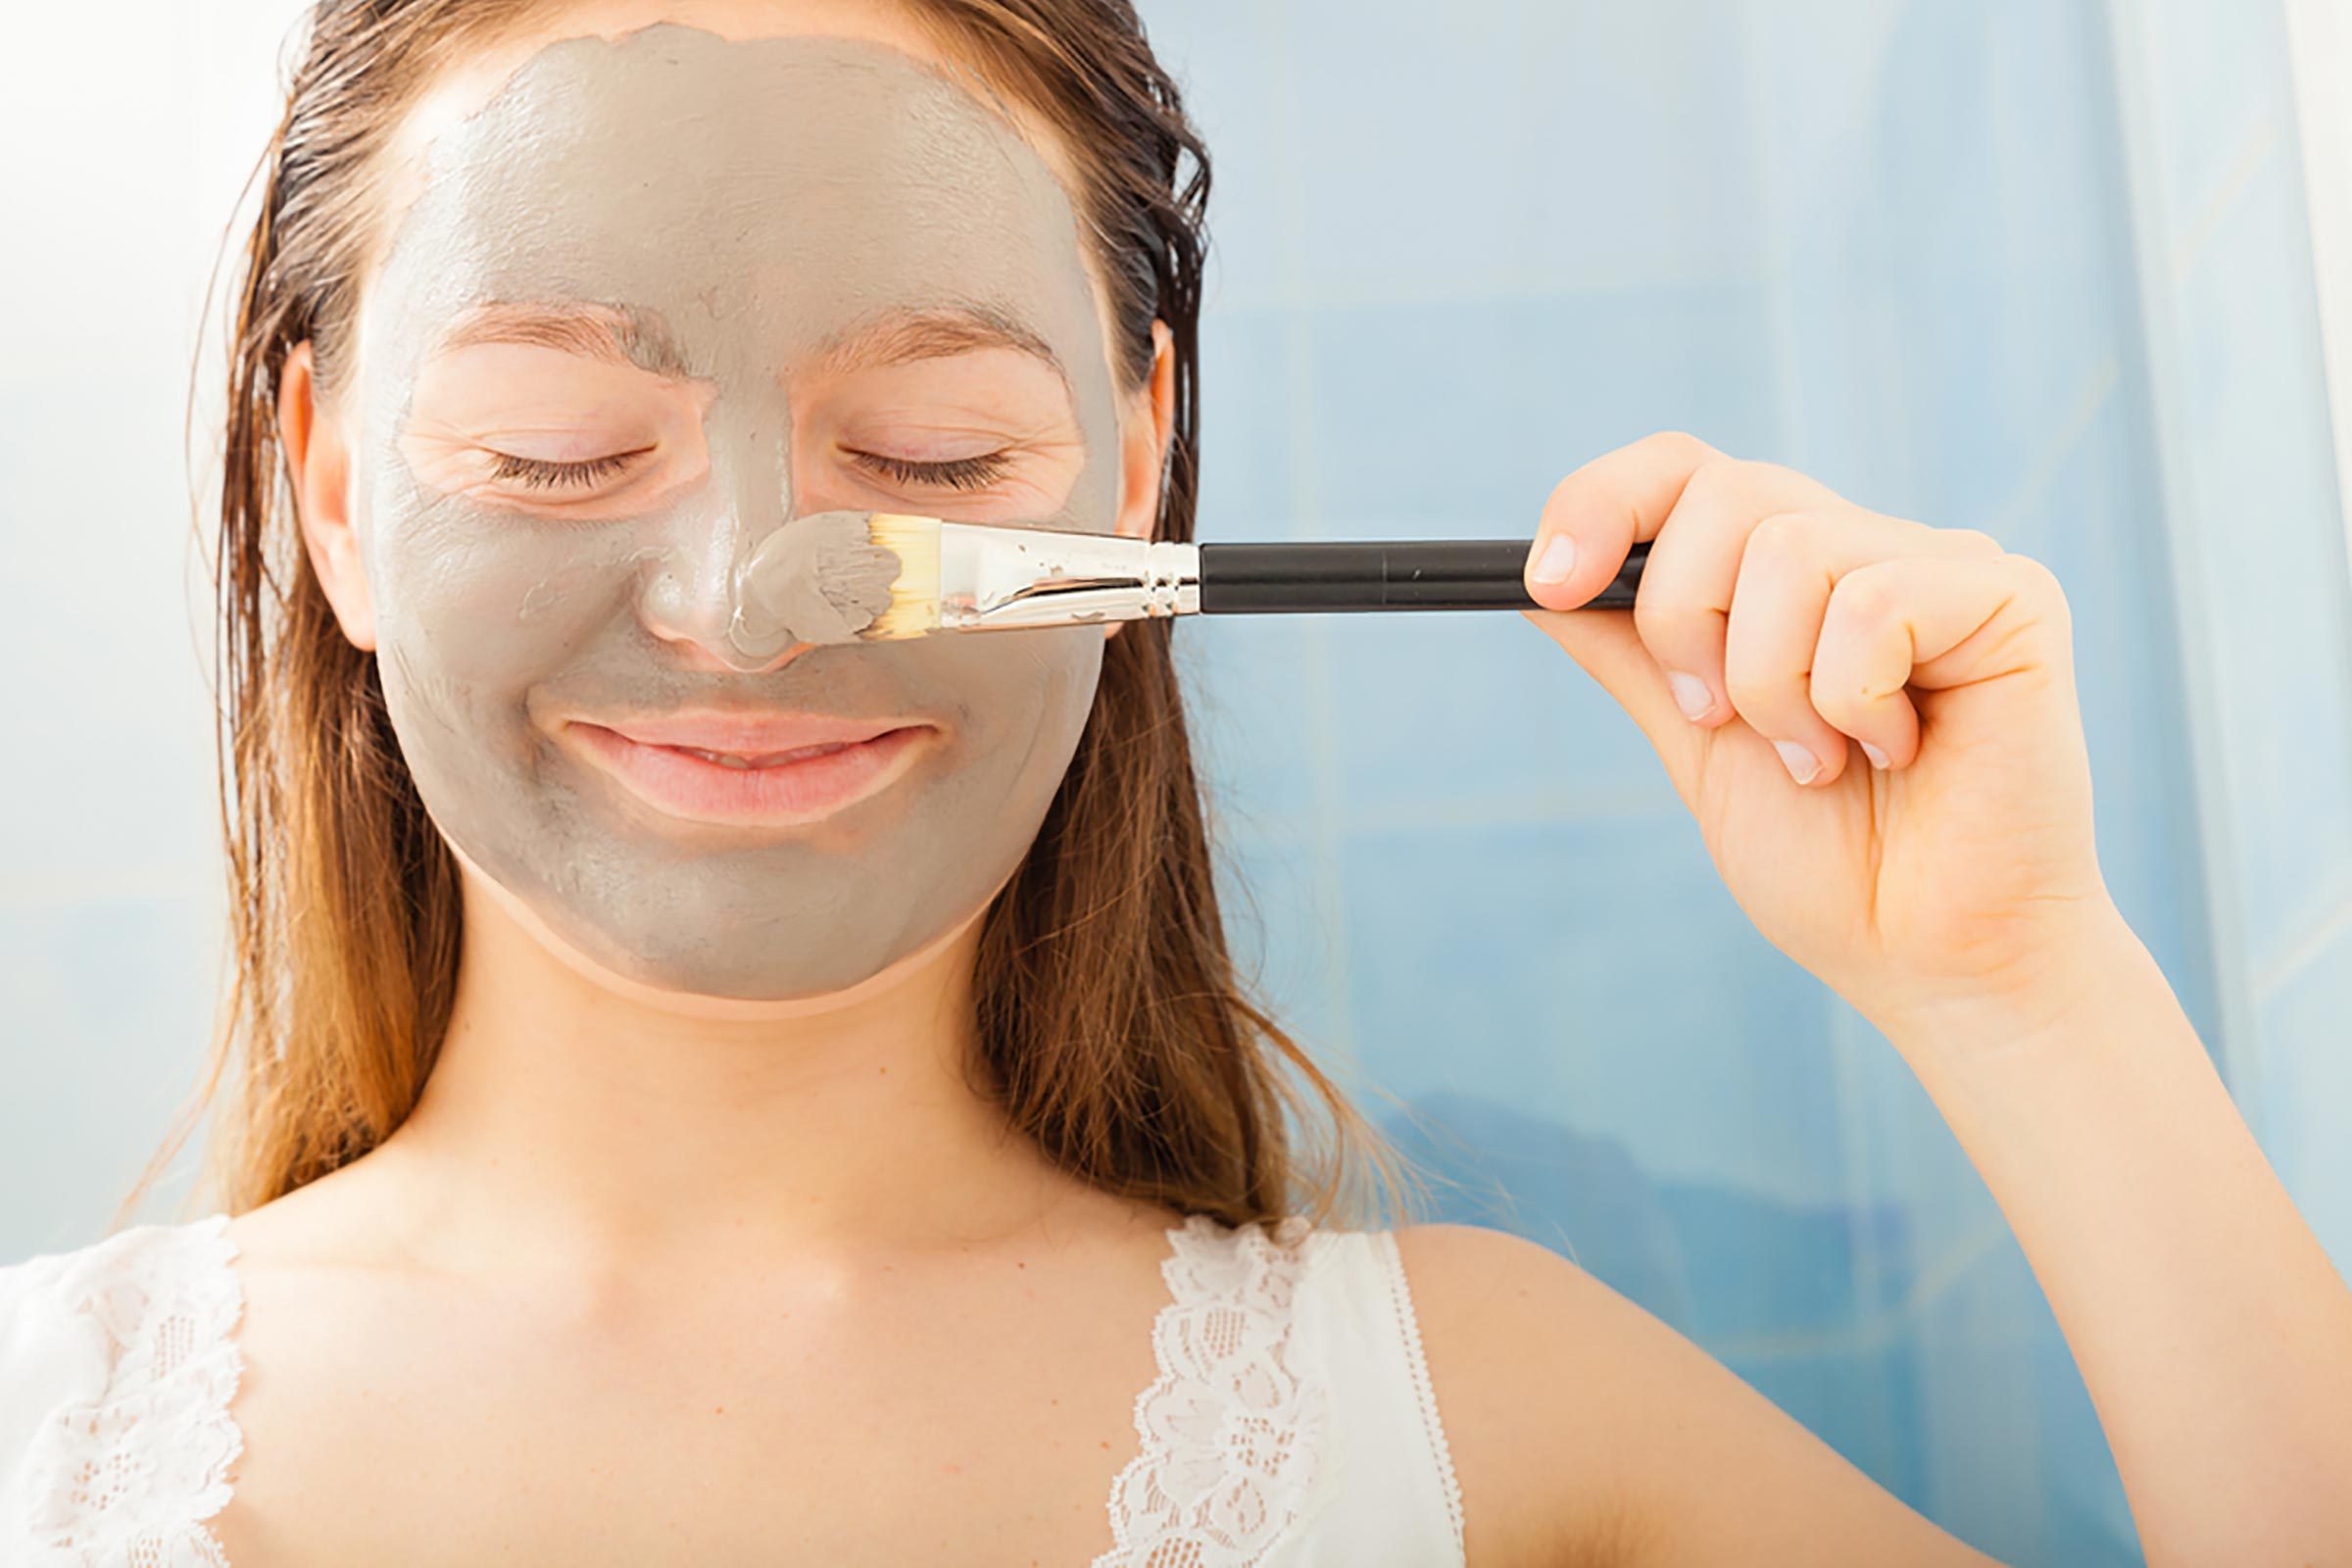 9 DIY Facial Treatments You Can Safely Do at Home The Healthy image